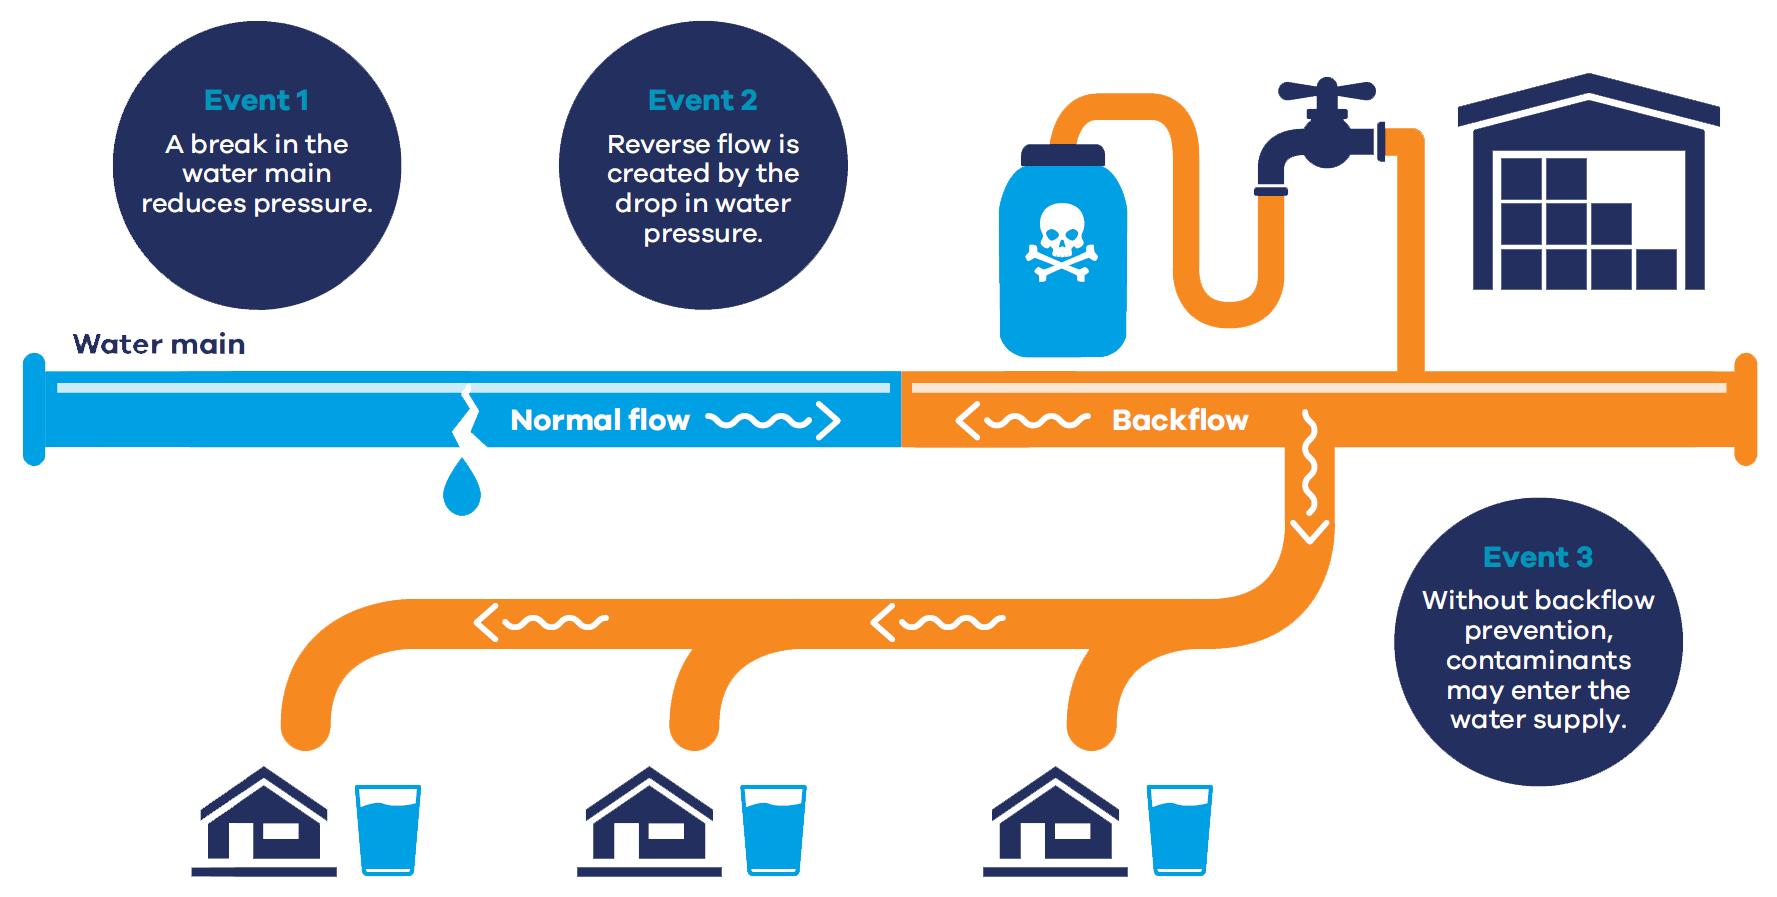 An example of why we need backflow prevention is if a break in the water main pressure, then a reverse flow is created by the drop of water pressure. With out backflow prevention, contaminants may enter the water supply.